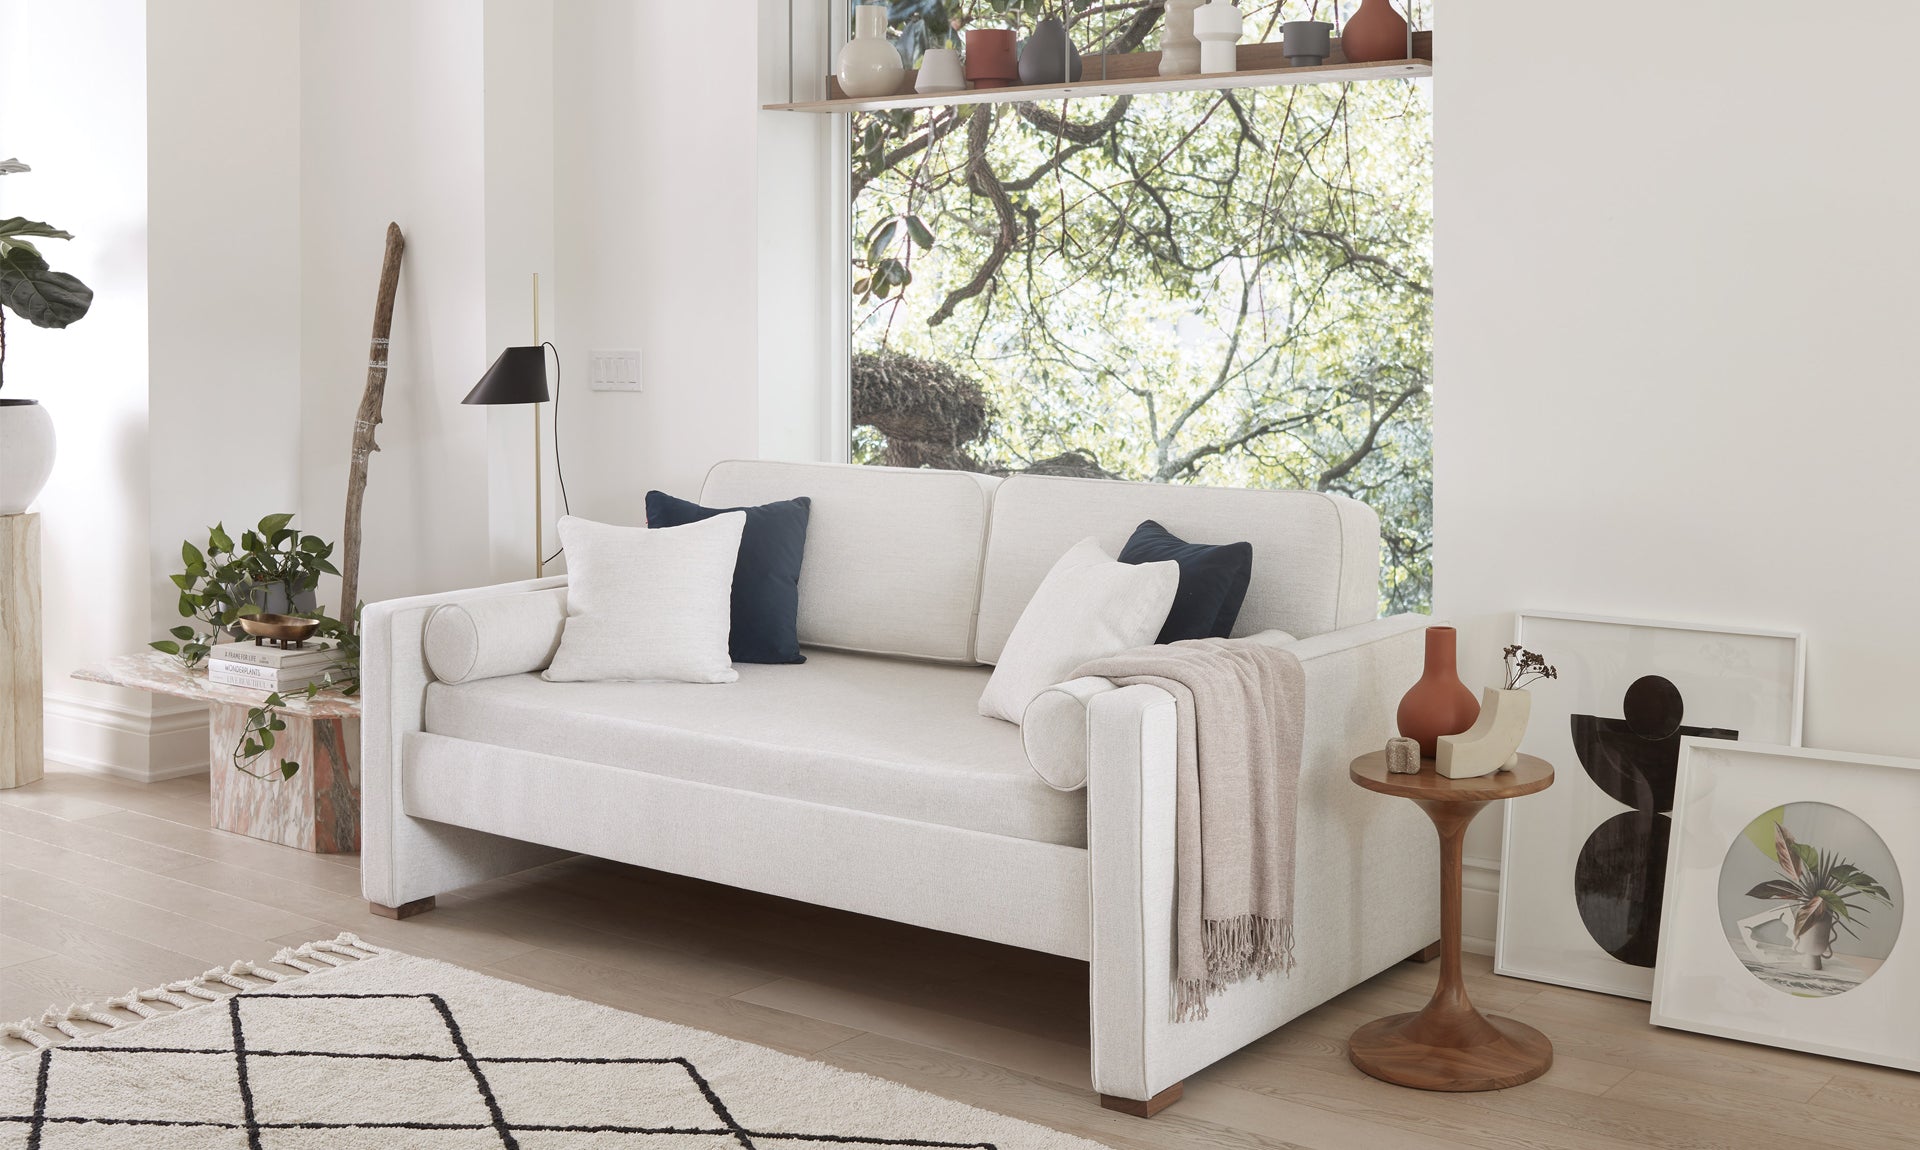 Dorma Twin DayBed - modern day bed sofa combination